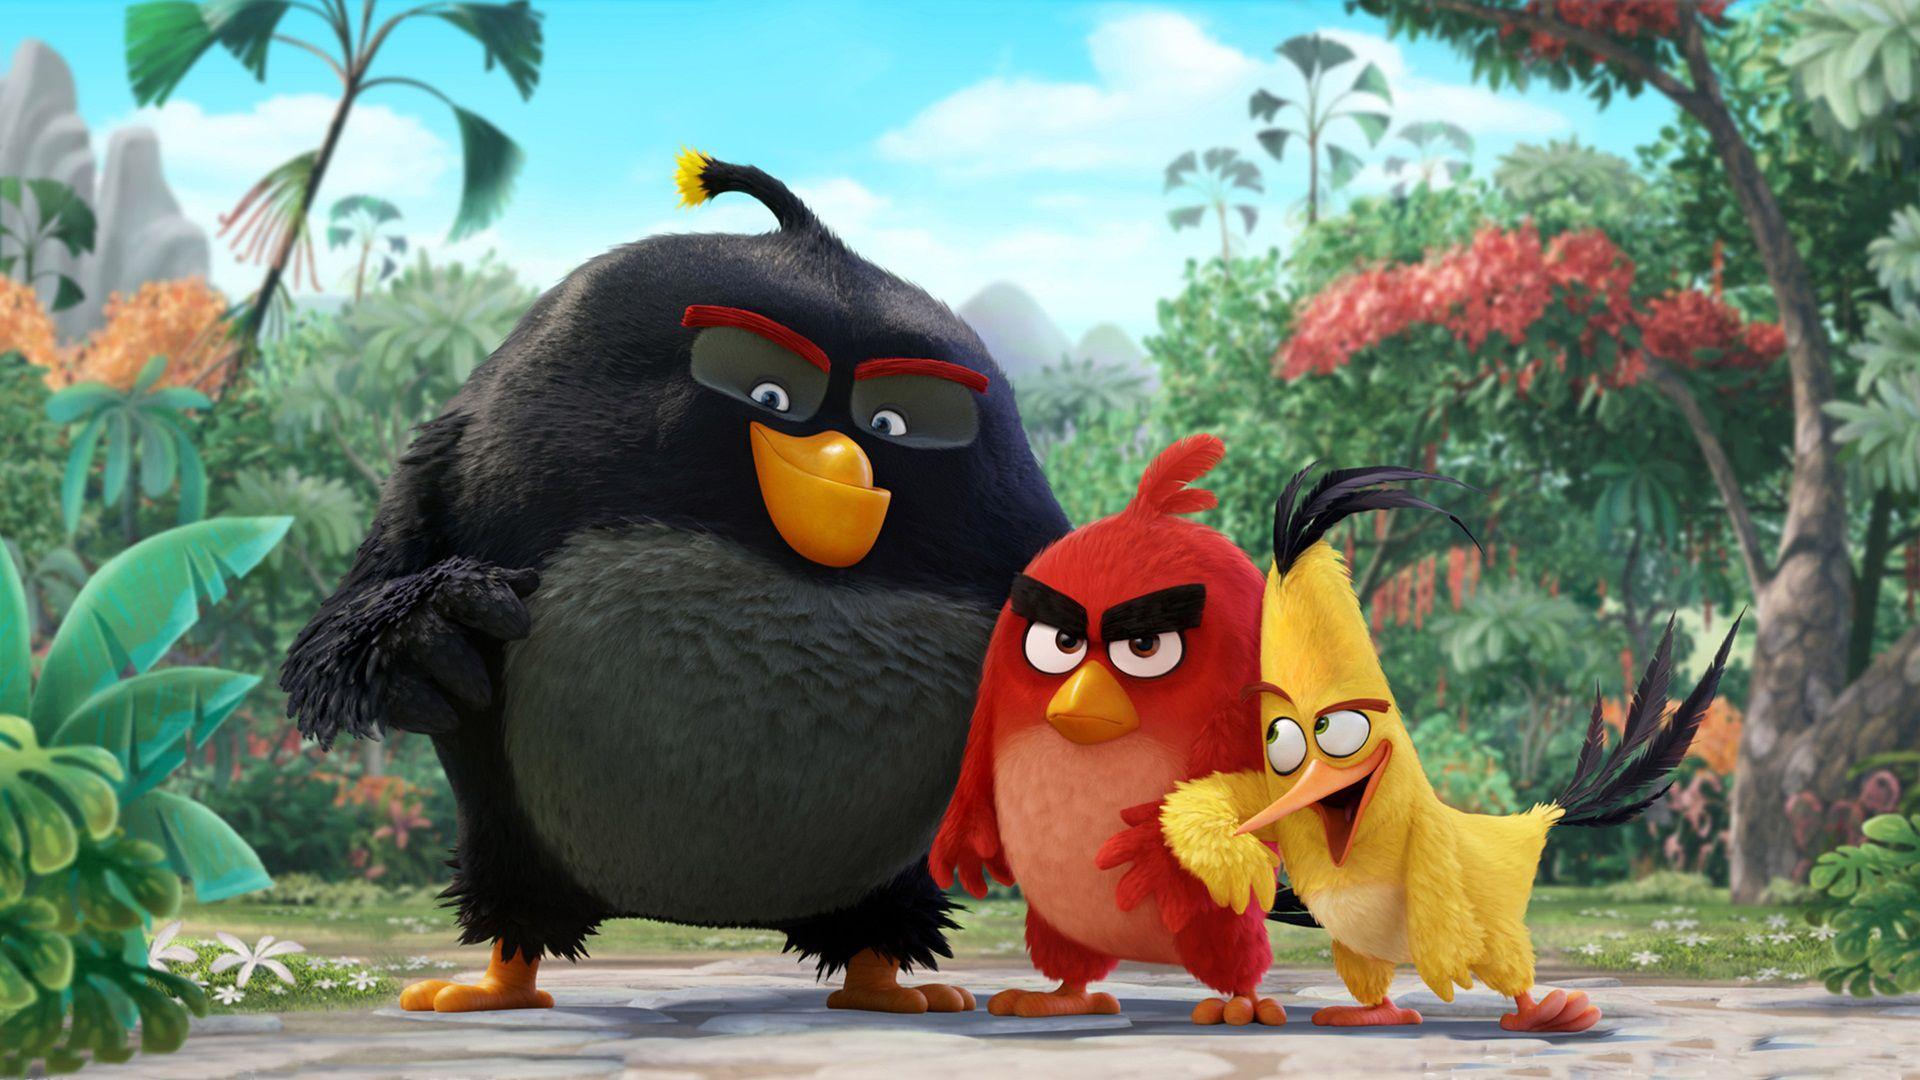 Review: The Angry Birds Movie